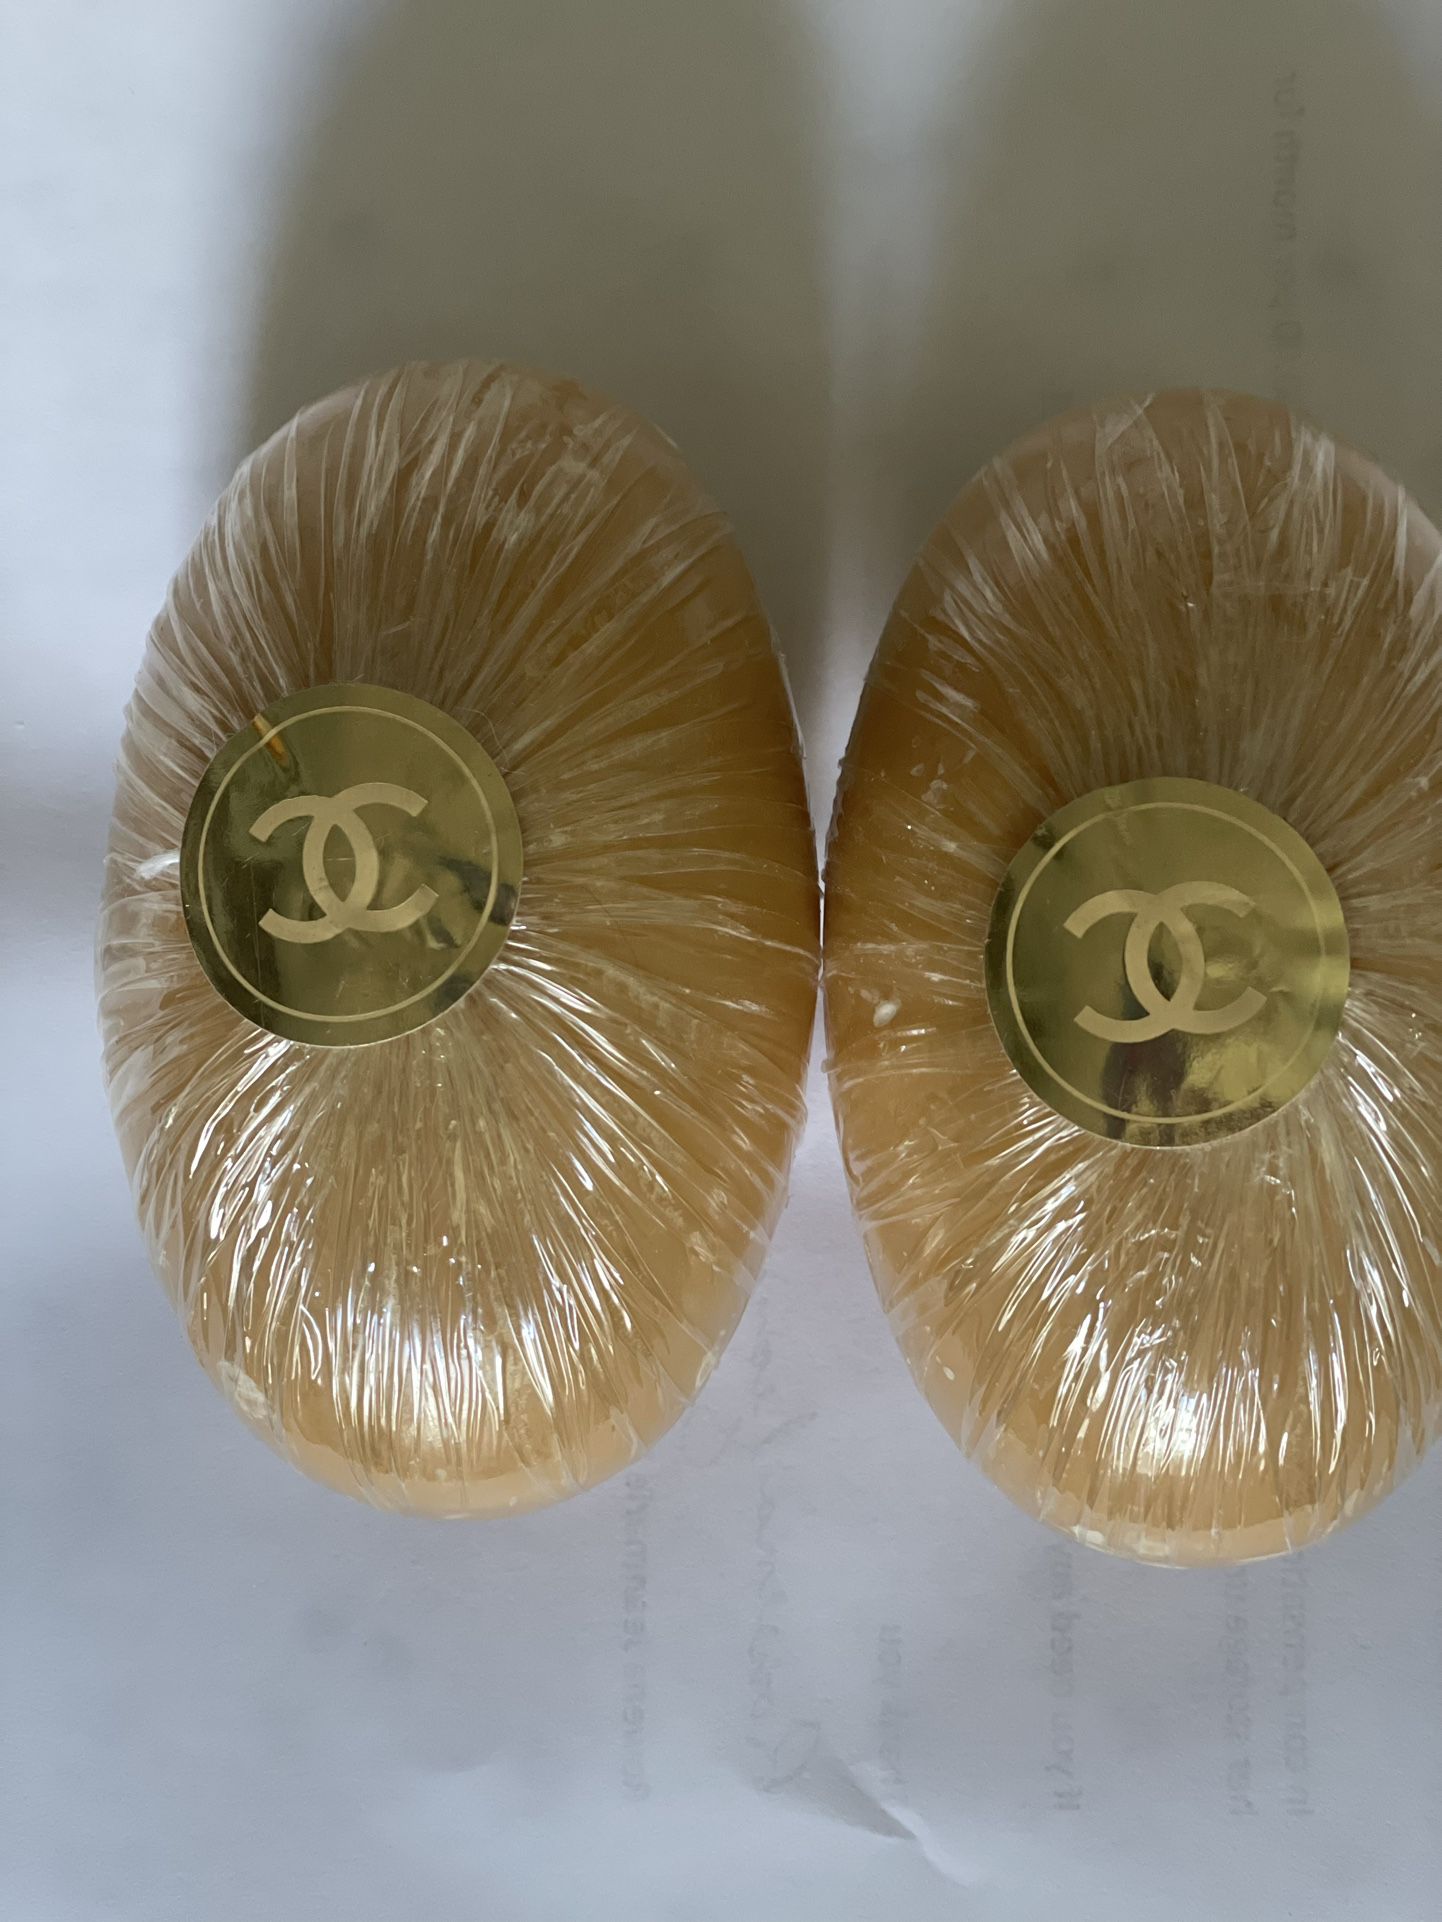 2 Vintage Chanel Bar Soap for Sale in Acampo, CA - OfferUp